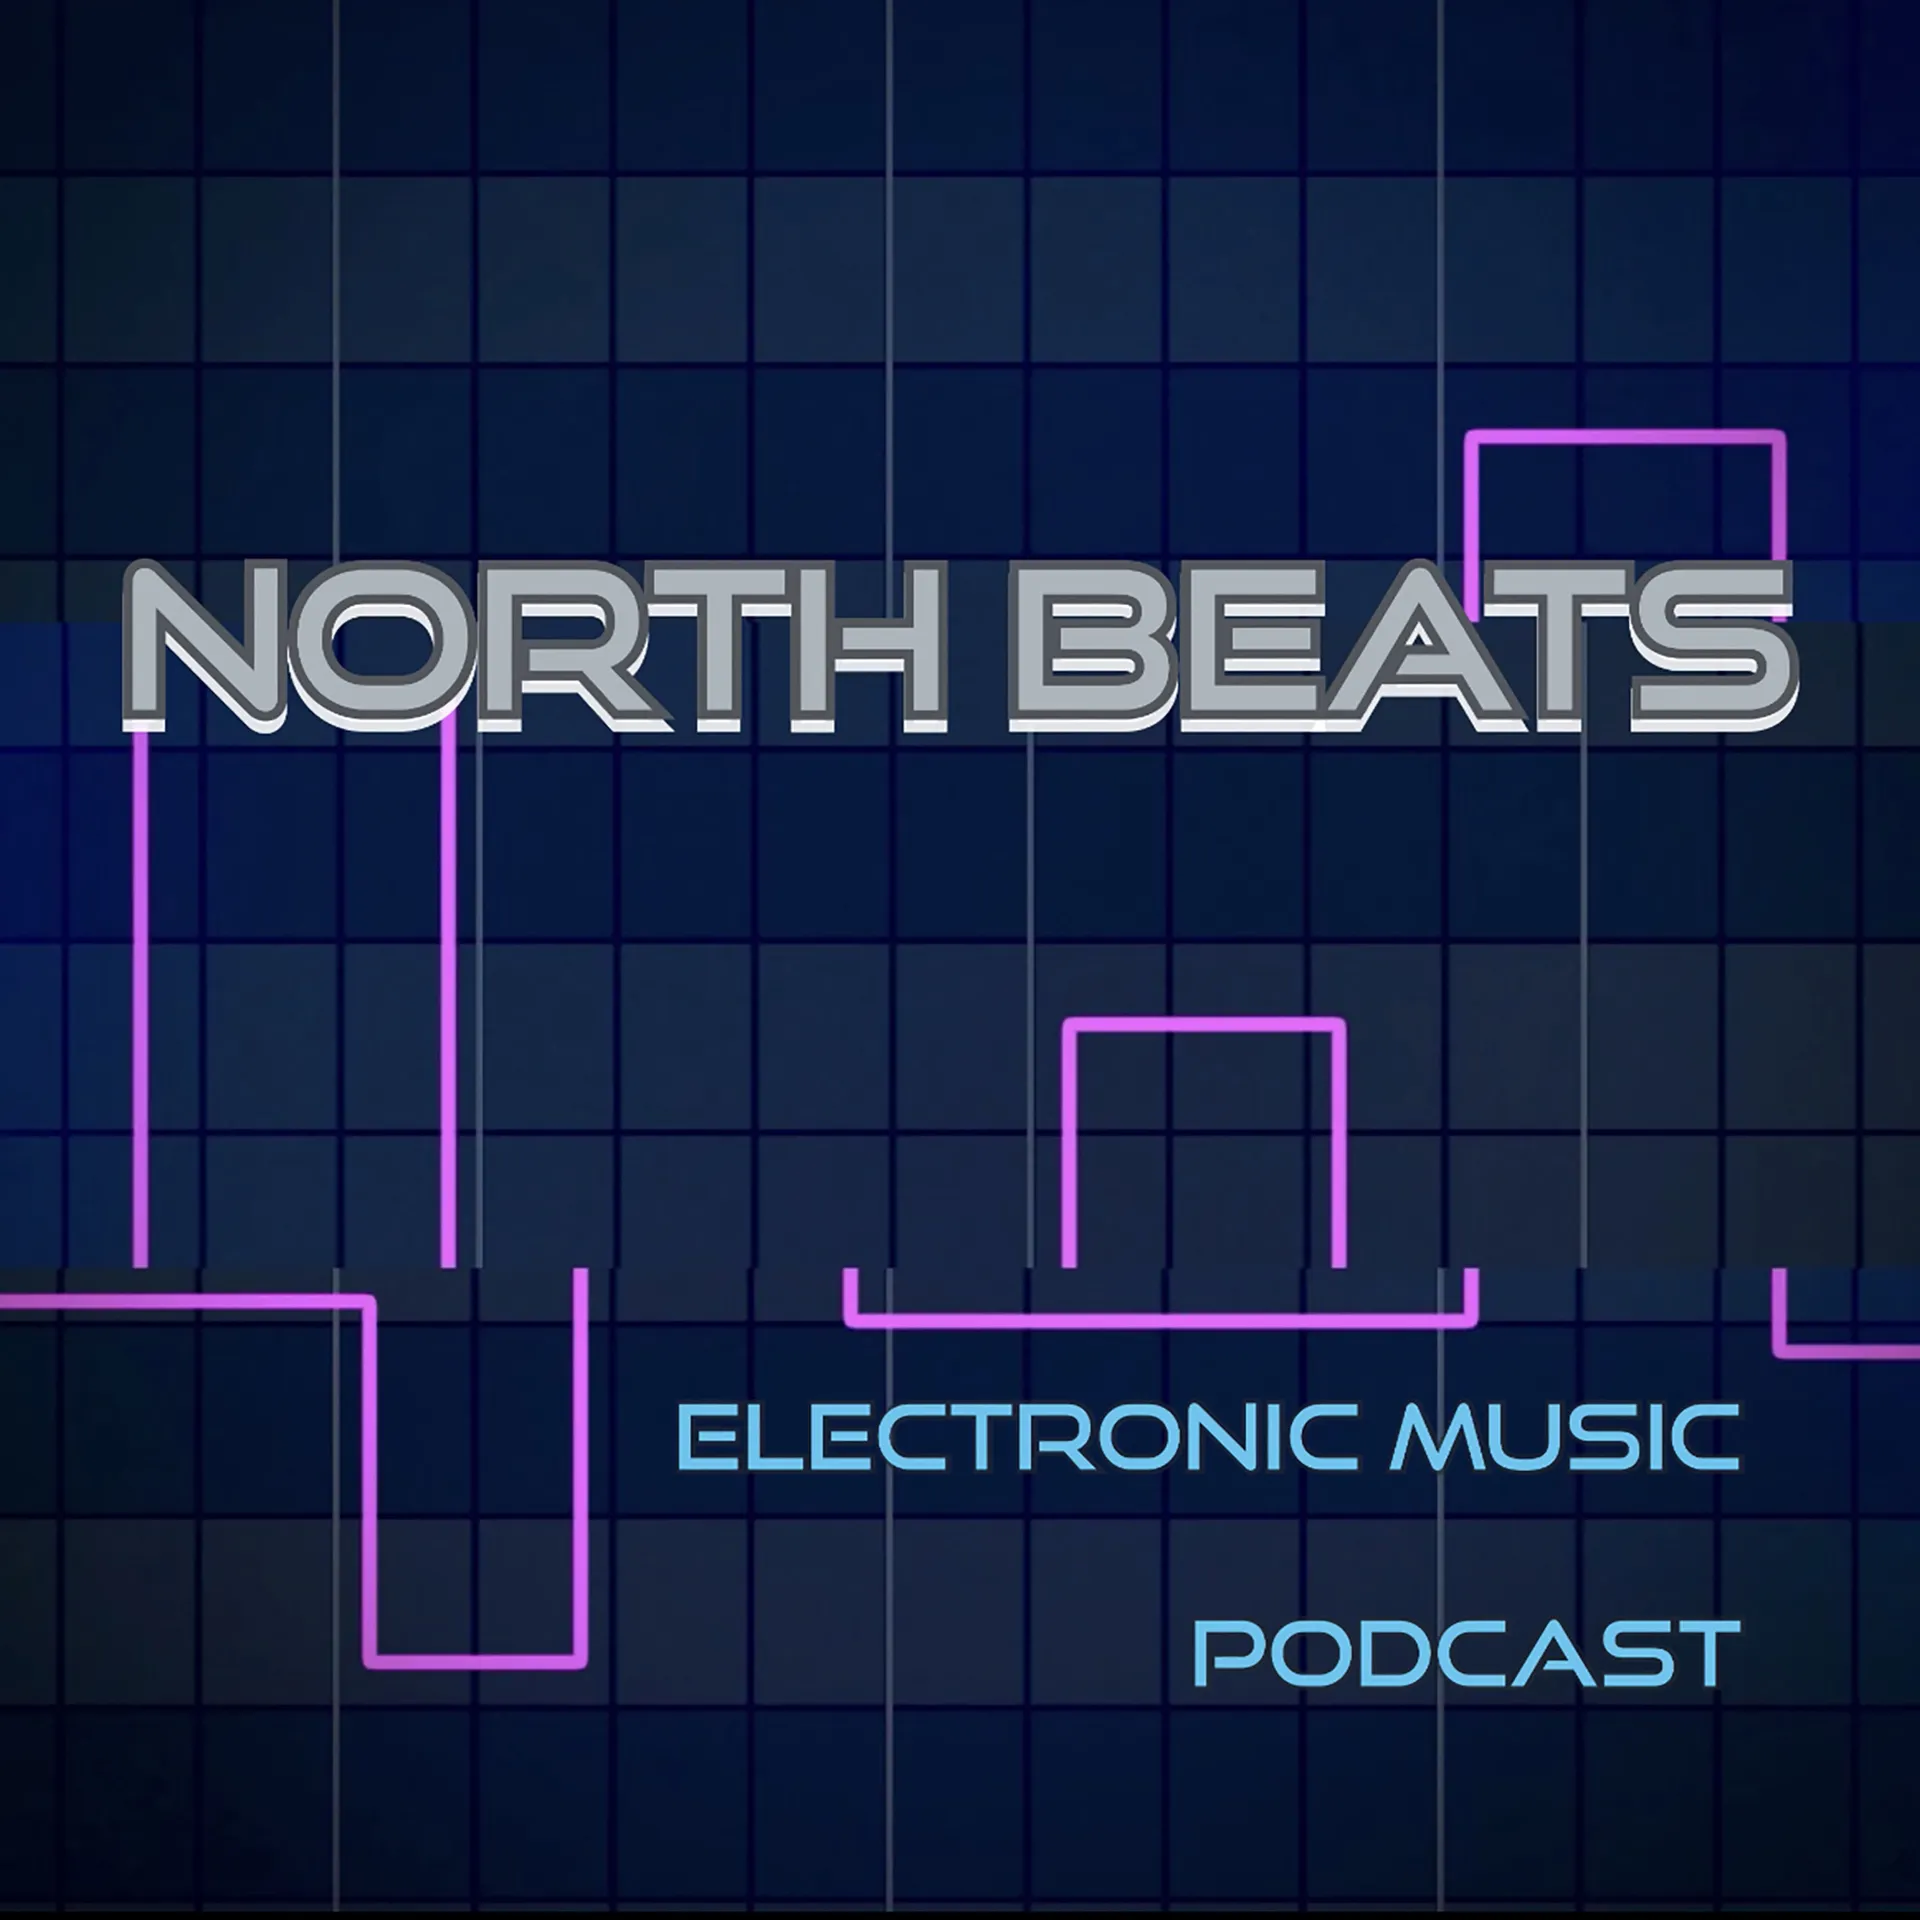 Tim Thompson interview on North Beats podcast